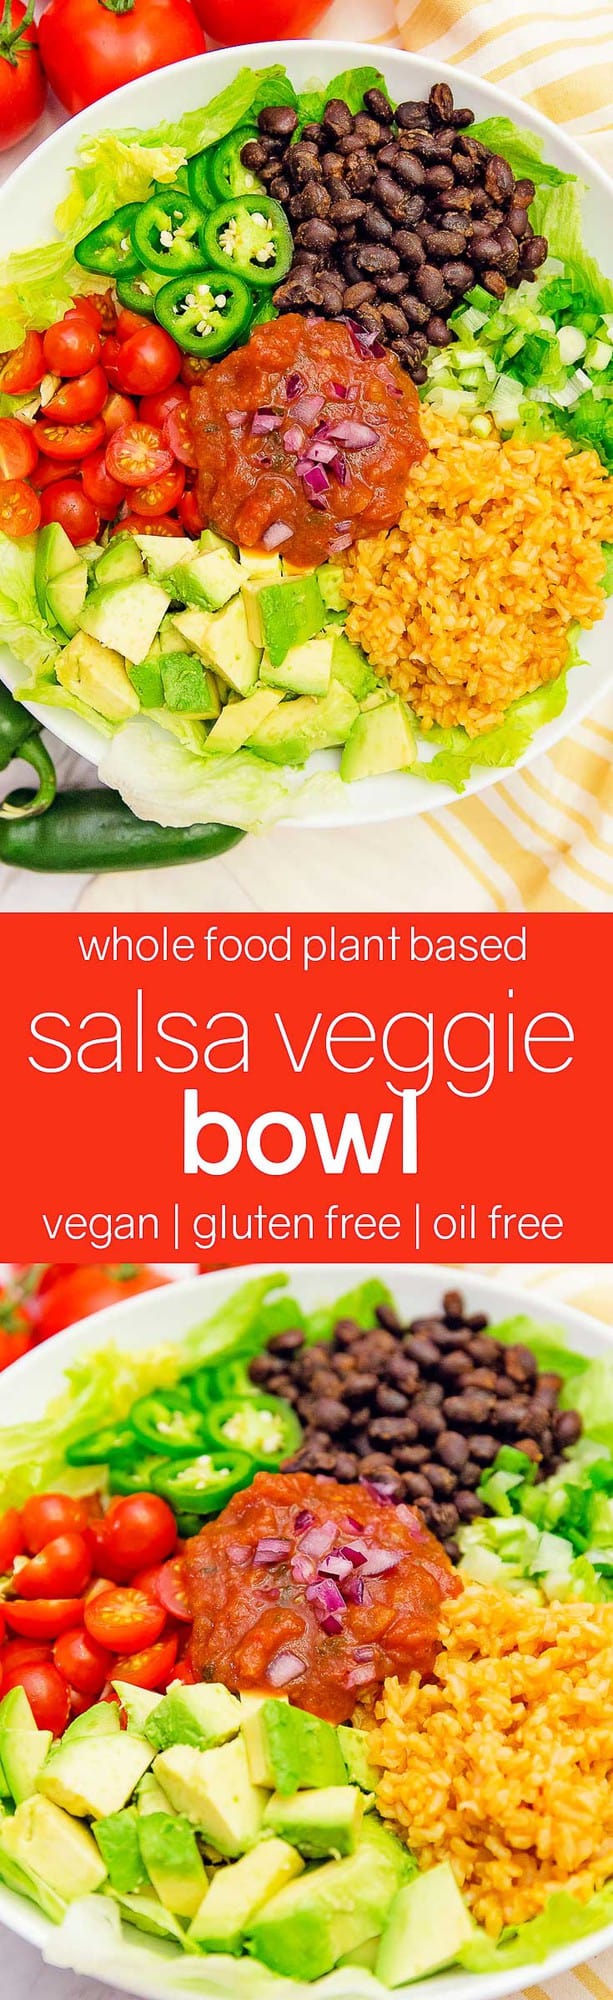 Salsa veggie bowl, veggie bowl, salsa bowl, whole food plant based bowl, recipe, veggie bowl recipe, whole food plant based salad, salsa bowl recipe, vegan, vegan recipe, whole food plant based recipe, whole food plant based, vegetarian, vegetarian recipe, gluten free, gluten free recipe, vegan dinner, vegan lunch, vegan meals, vegetarian dinner, vegetarian lunch, vegetarian meal, whole food plant based dinner, whole food plant based lunch, whole food plant based meal, gluten free dinner, gluten free lunch, gluten free meal, healthy, oil free, no oil, red onions, black beans, lettuce, salad, corn, Mexican rice, Spanish rice, rice, black beans, green onions, tomatoes, jalapeño, quick dinner, avocado, salsa dressing, fast dinner, entertaining, wfpb, dairy free, no dairy, traditional, Mexican, Southwestern, classic, delicious, the best, winter, fall, spring, summer, fast, easy, quick, simple, 30 minutes,